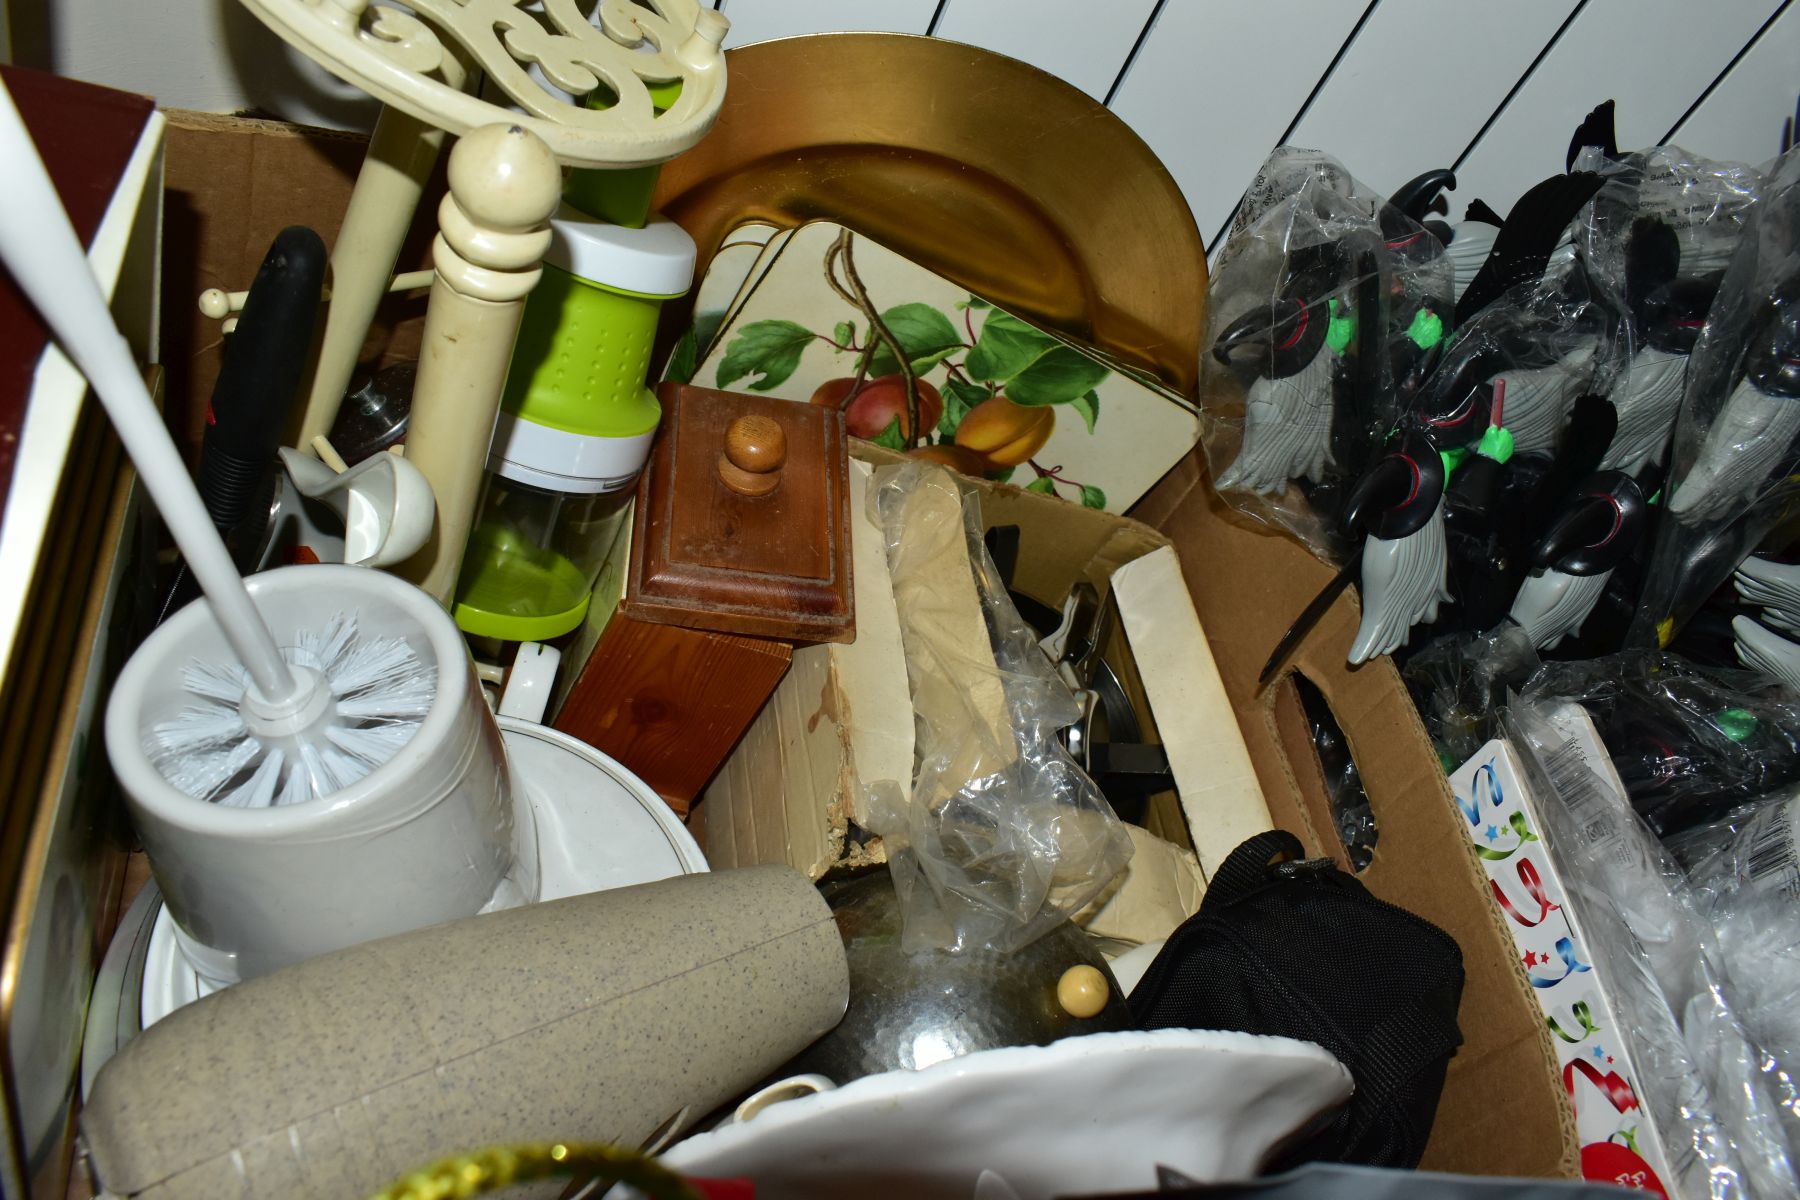 FOUR BOXES AND LOOSE OF SPORTING EQUIPMENT, HOUSEHOLD SUNDRIES, NOVELTY/PARTY ITEMS, CDS, DVDS, etc, - Image 8 of 13